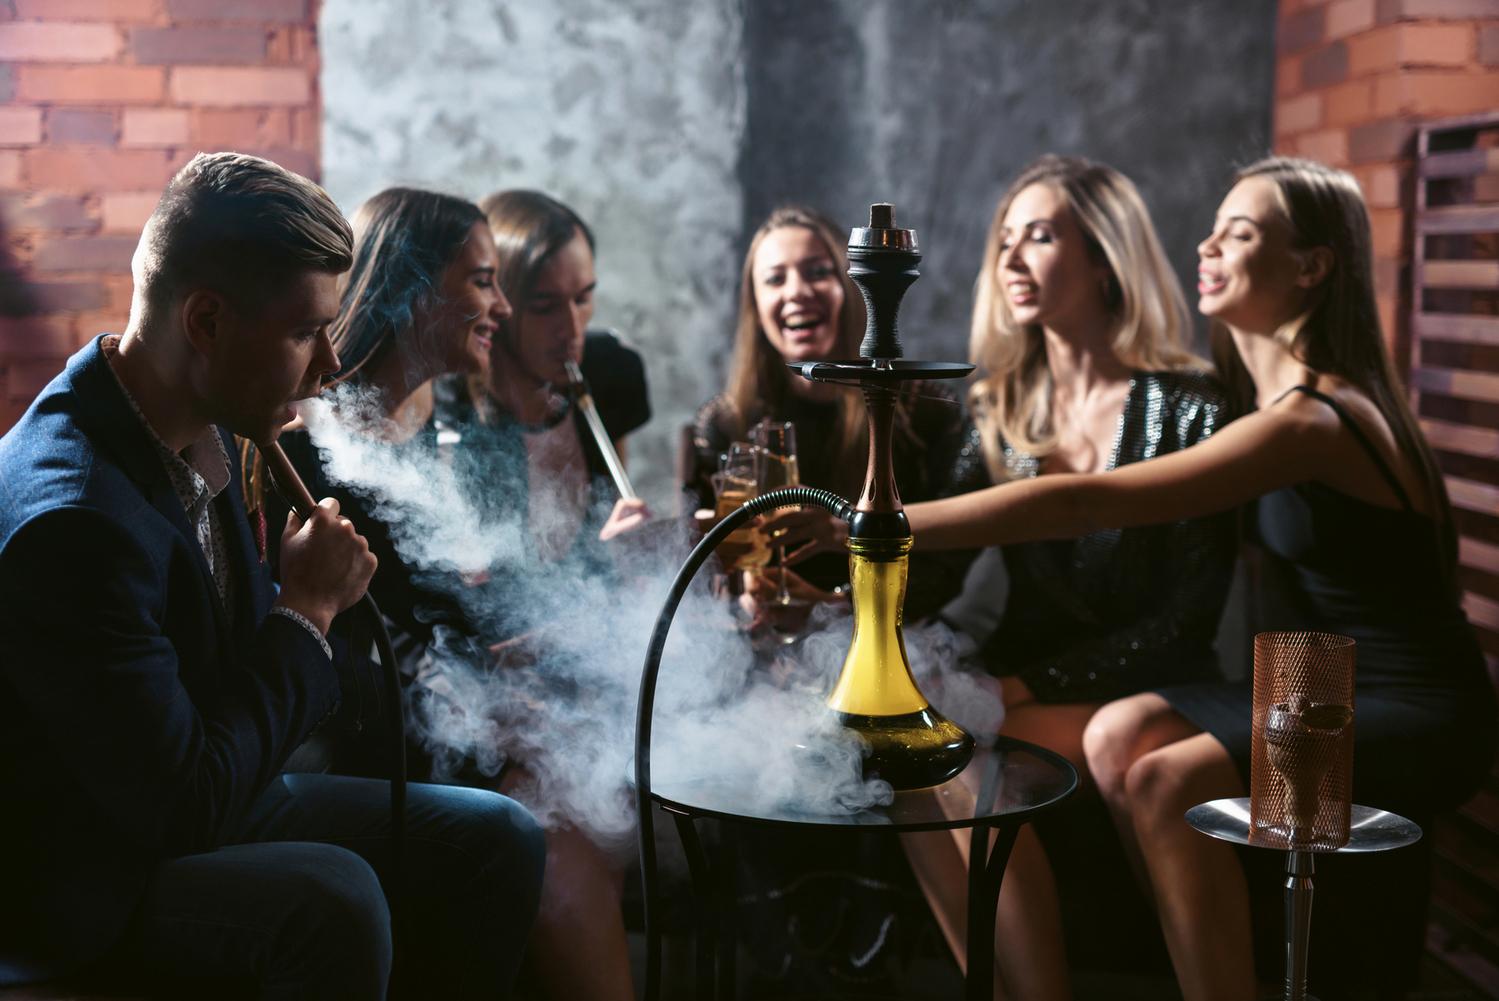 Best shisha bars and lounges in Dubai: Relaxation and flavor exploration!